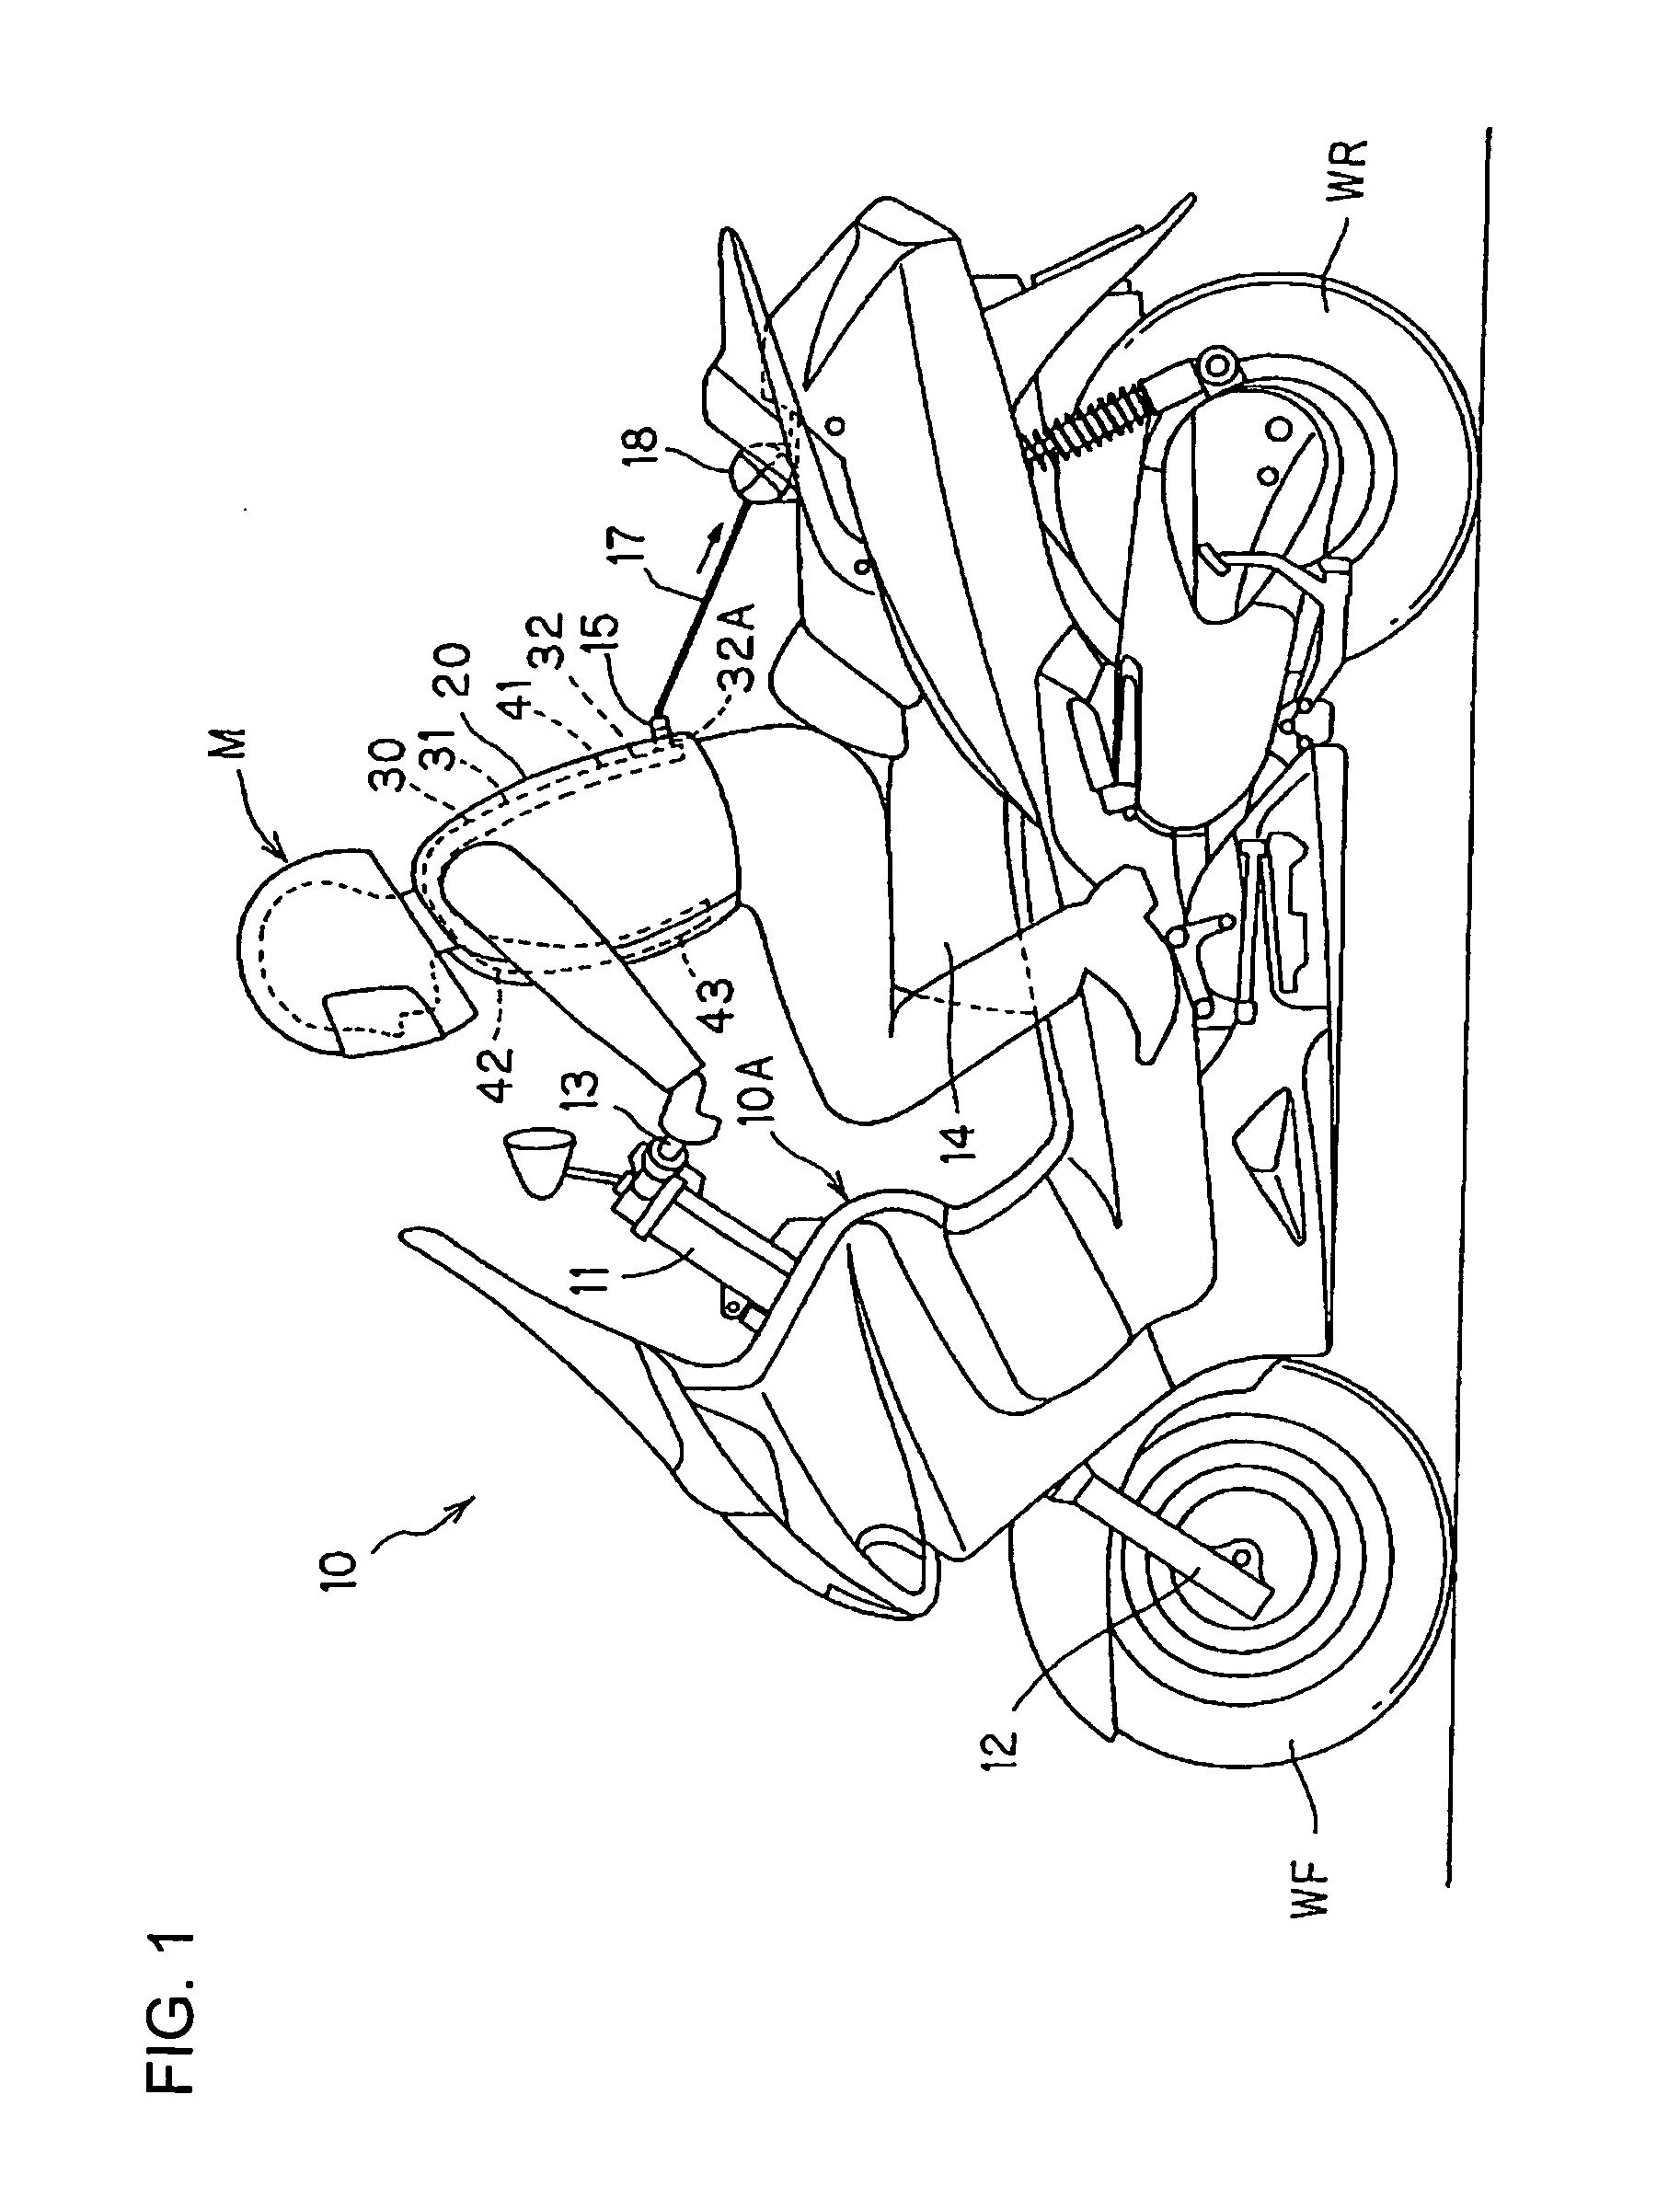 Airbag jacket for a vehicle rider